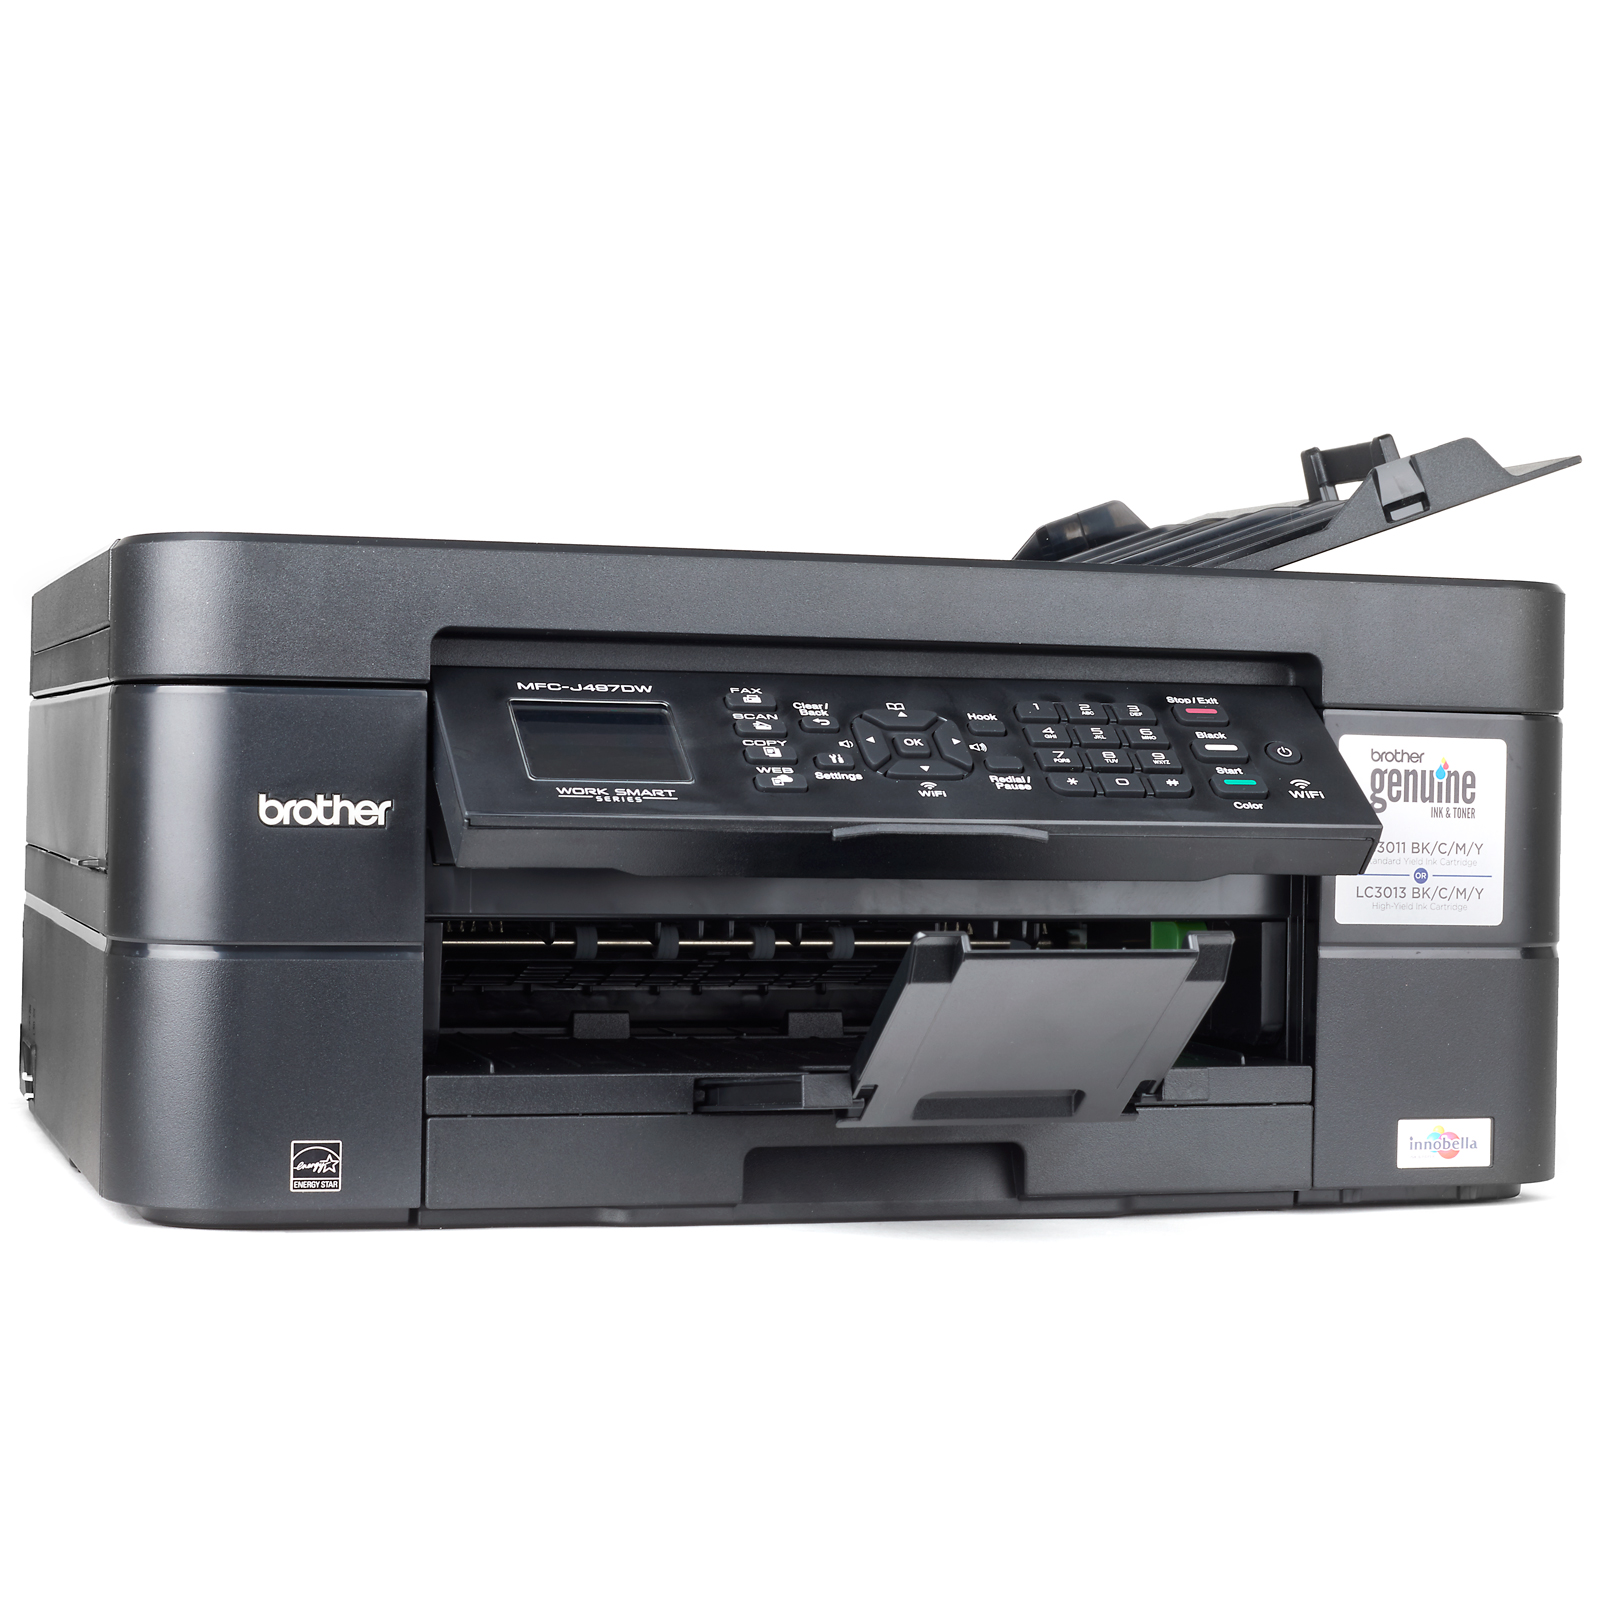 Brother Work Smart Series MFC-J497DW Wireless All-In-One Inkjet Printer (USED) - image 3 of 5